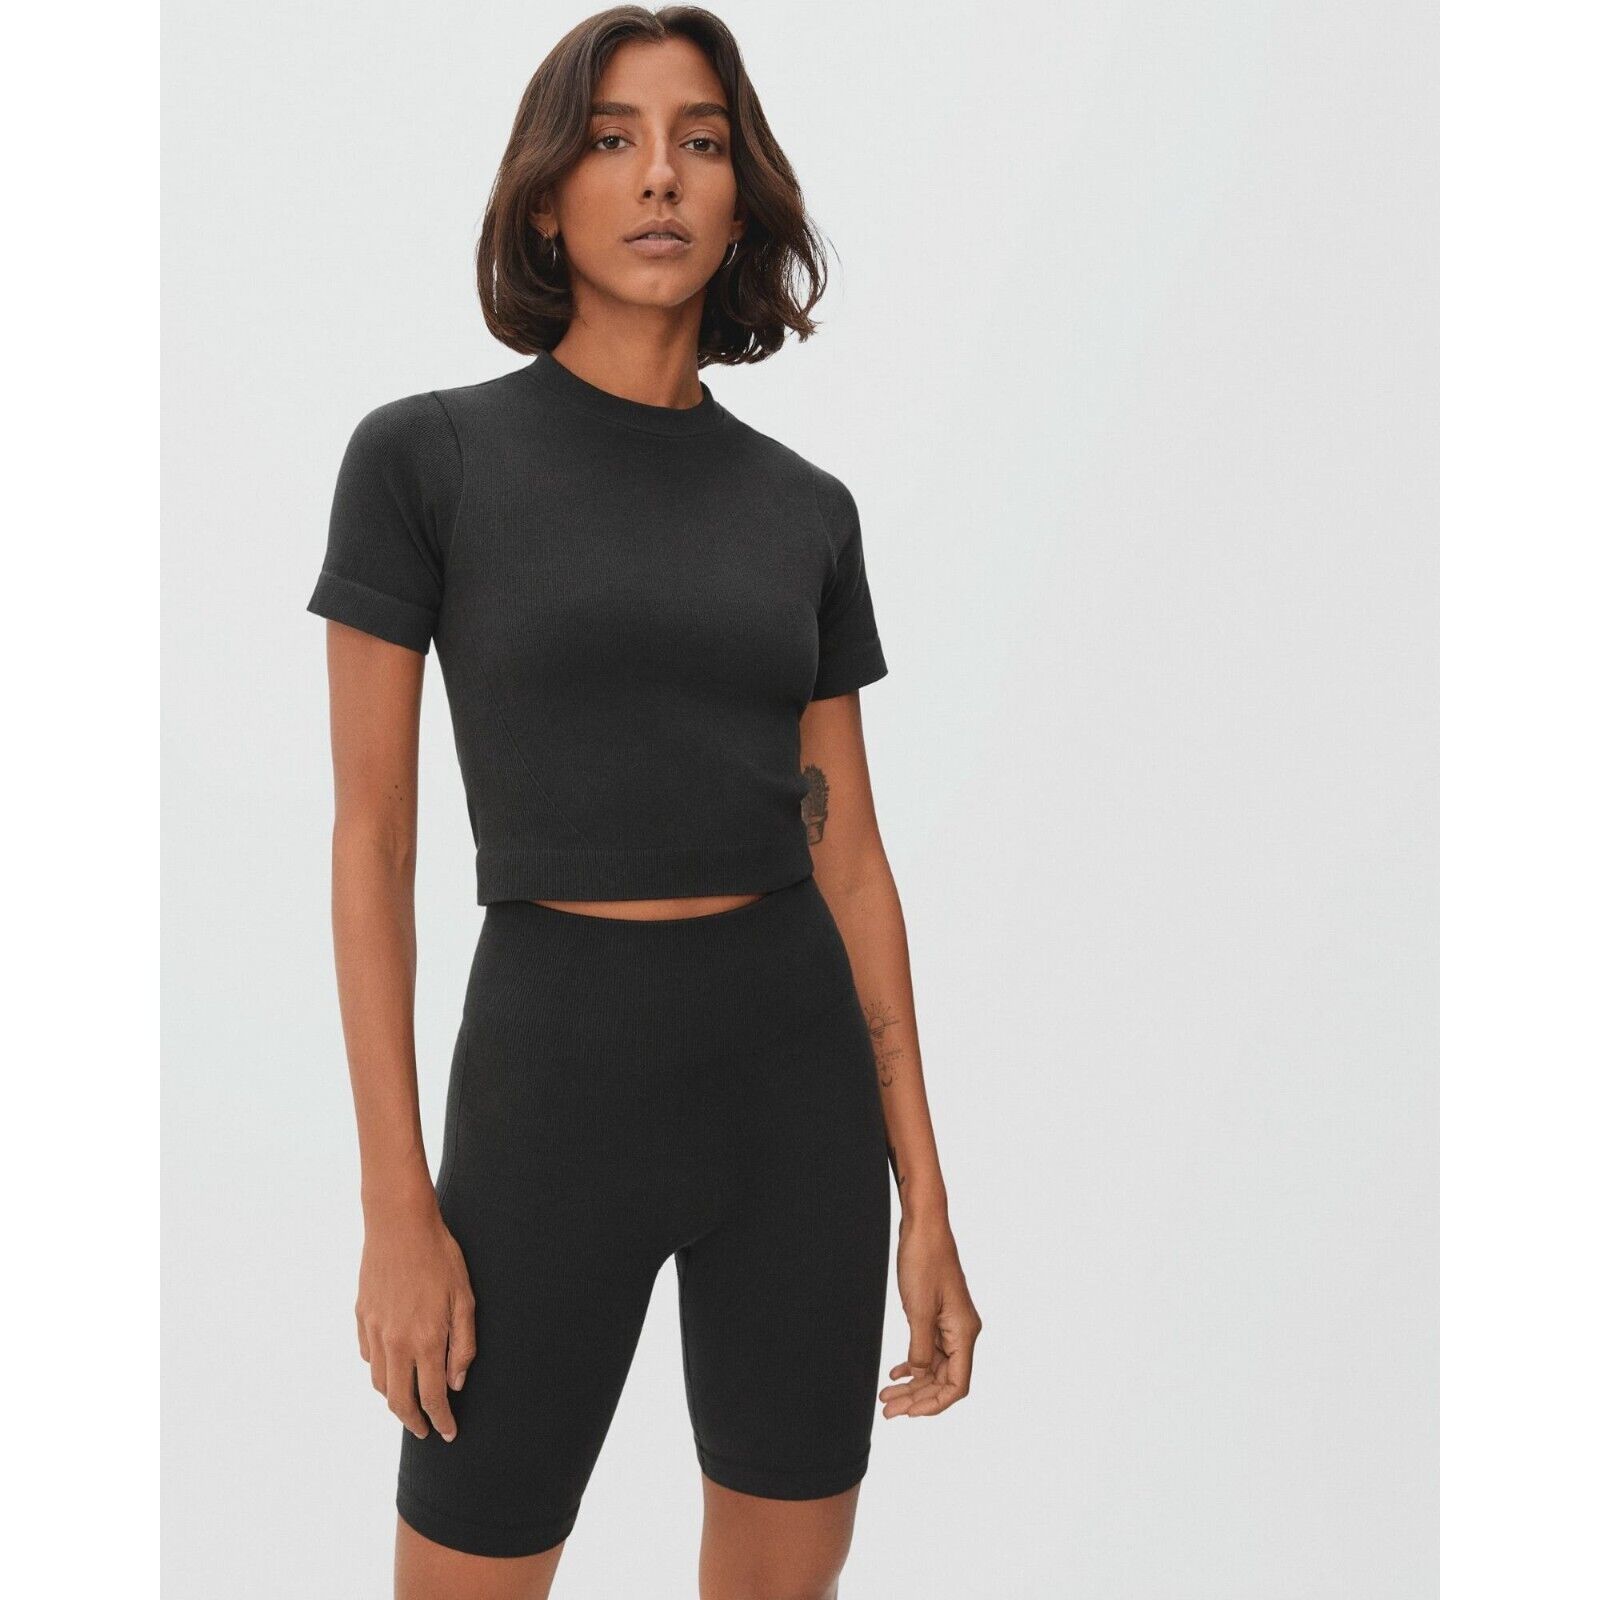 Primary image for Everlane Womens The Seamless Tee Top Cropped Black XS/S